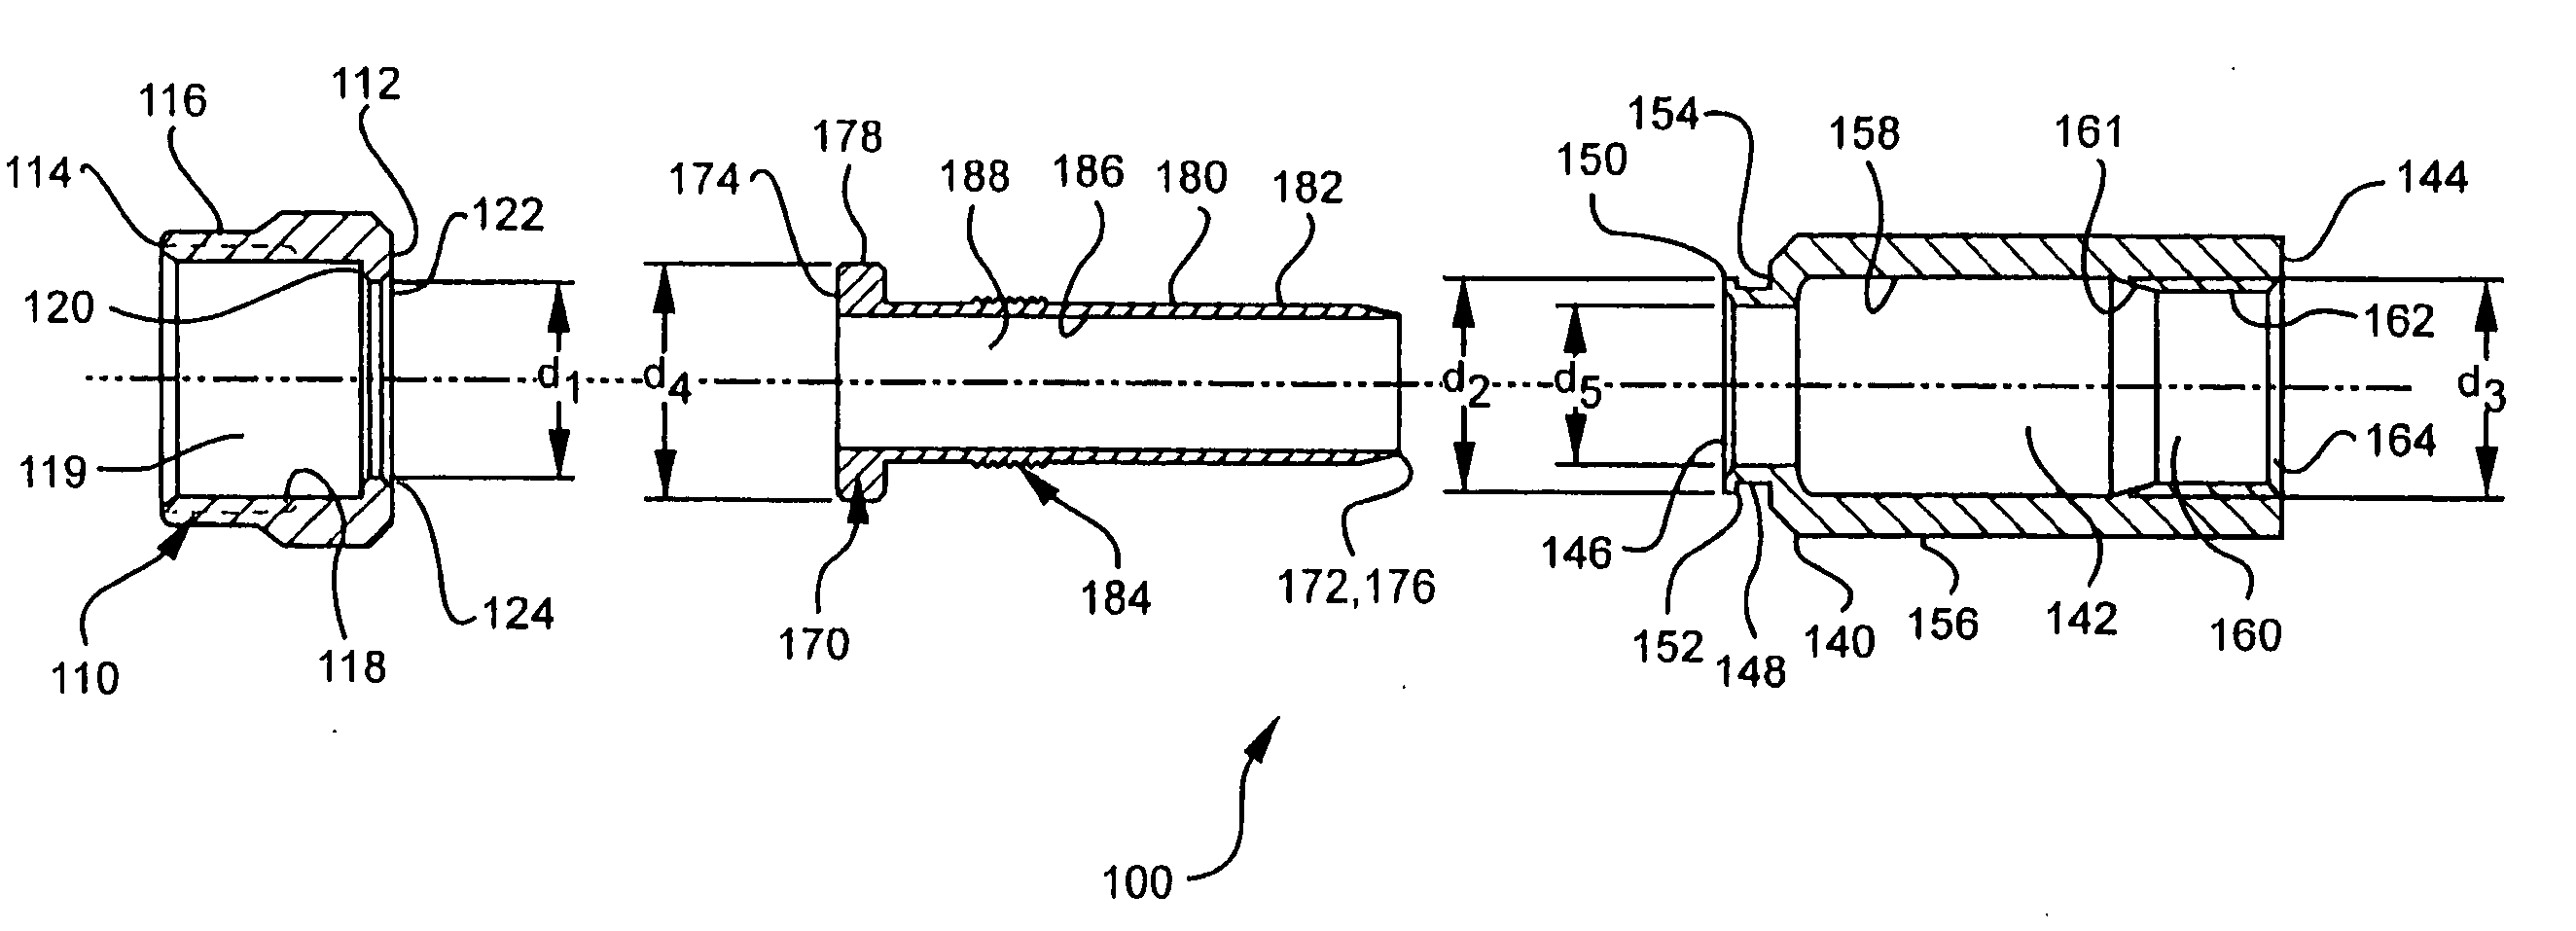 Sealed coaxial cable connector and related method